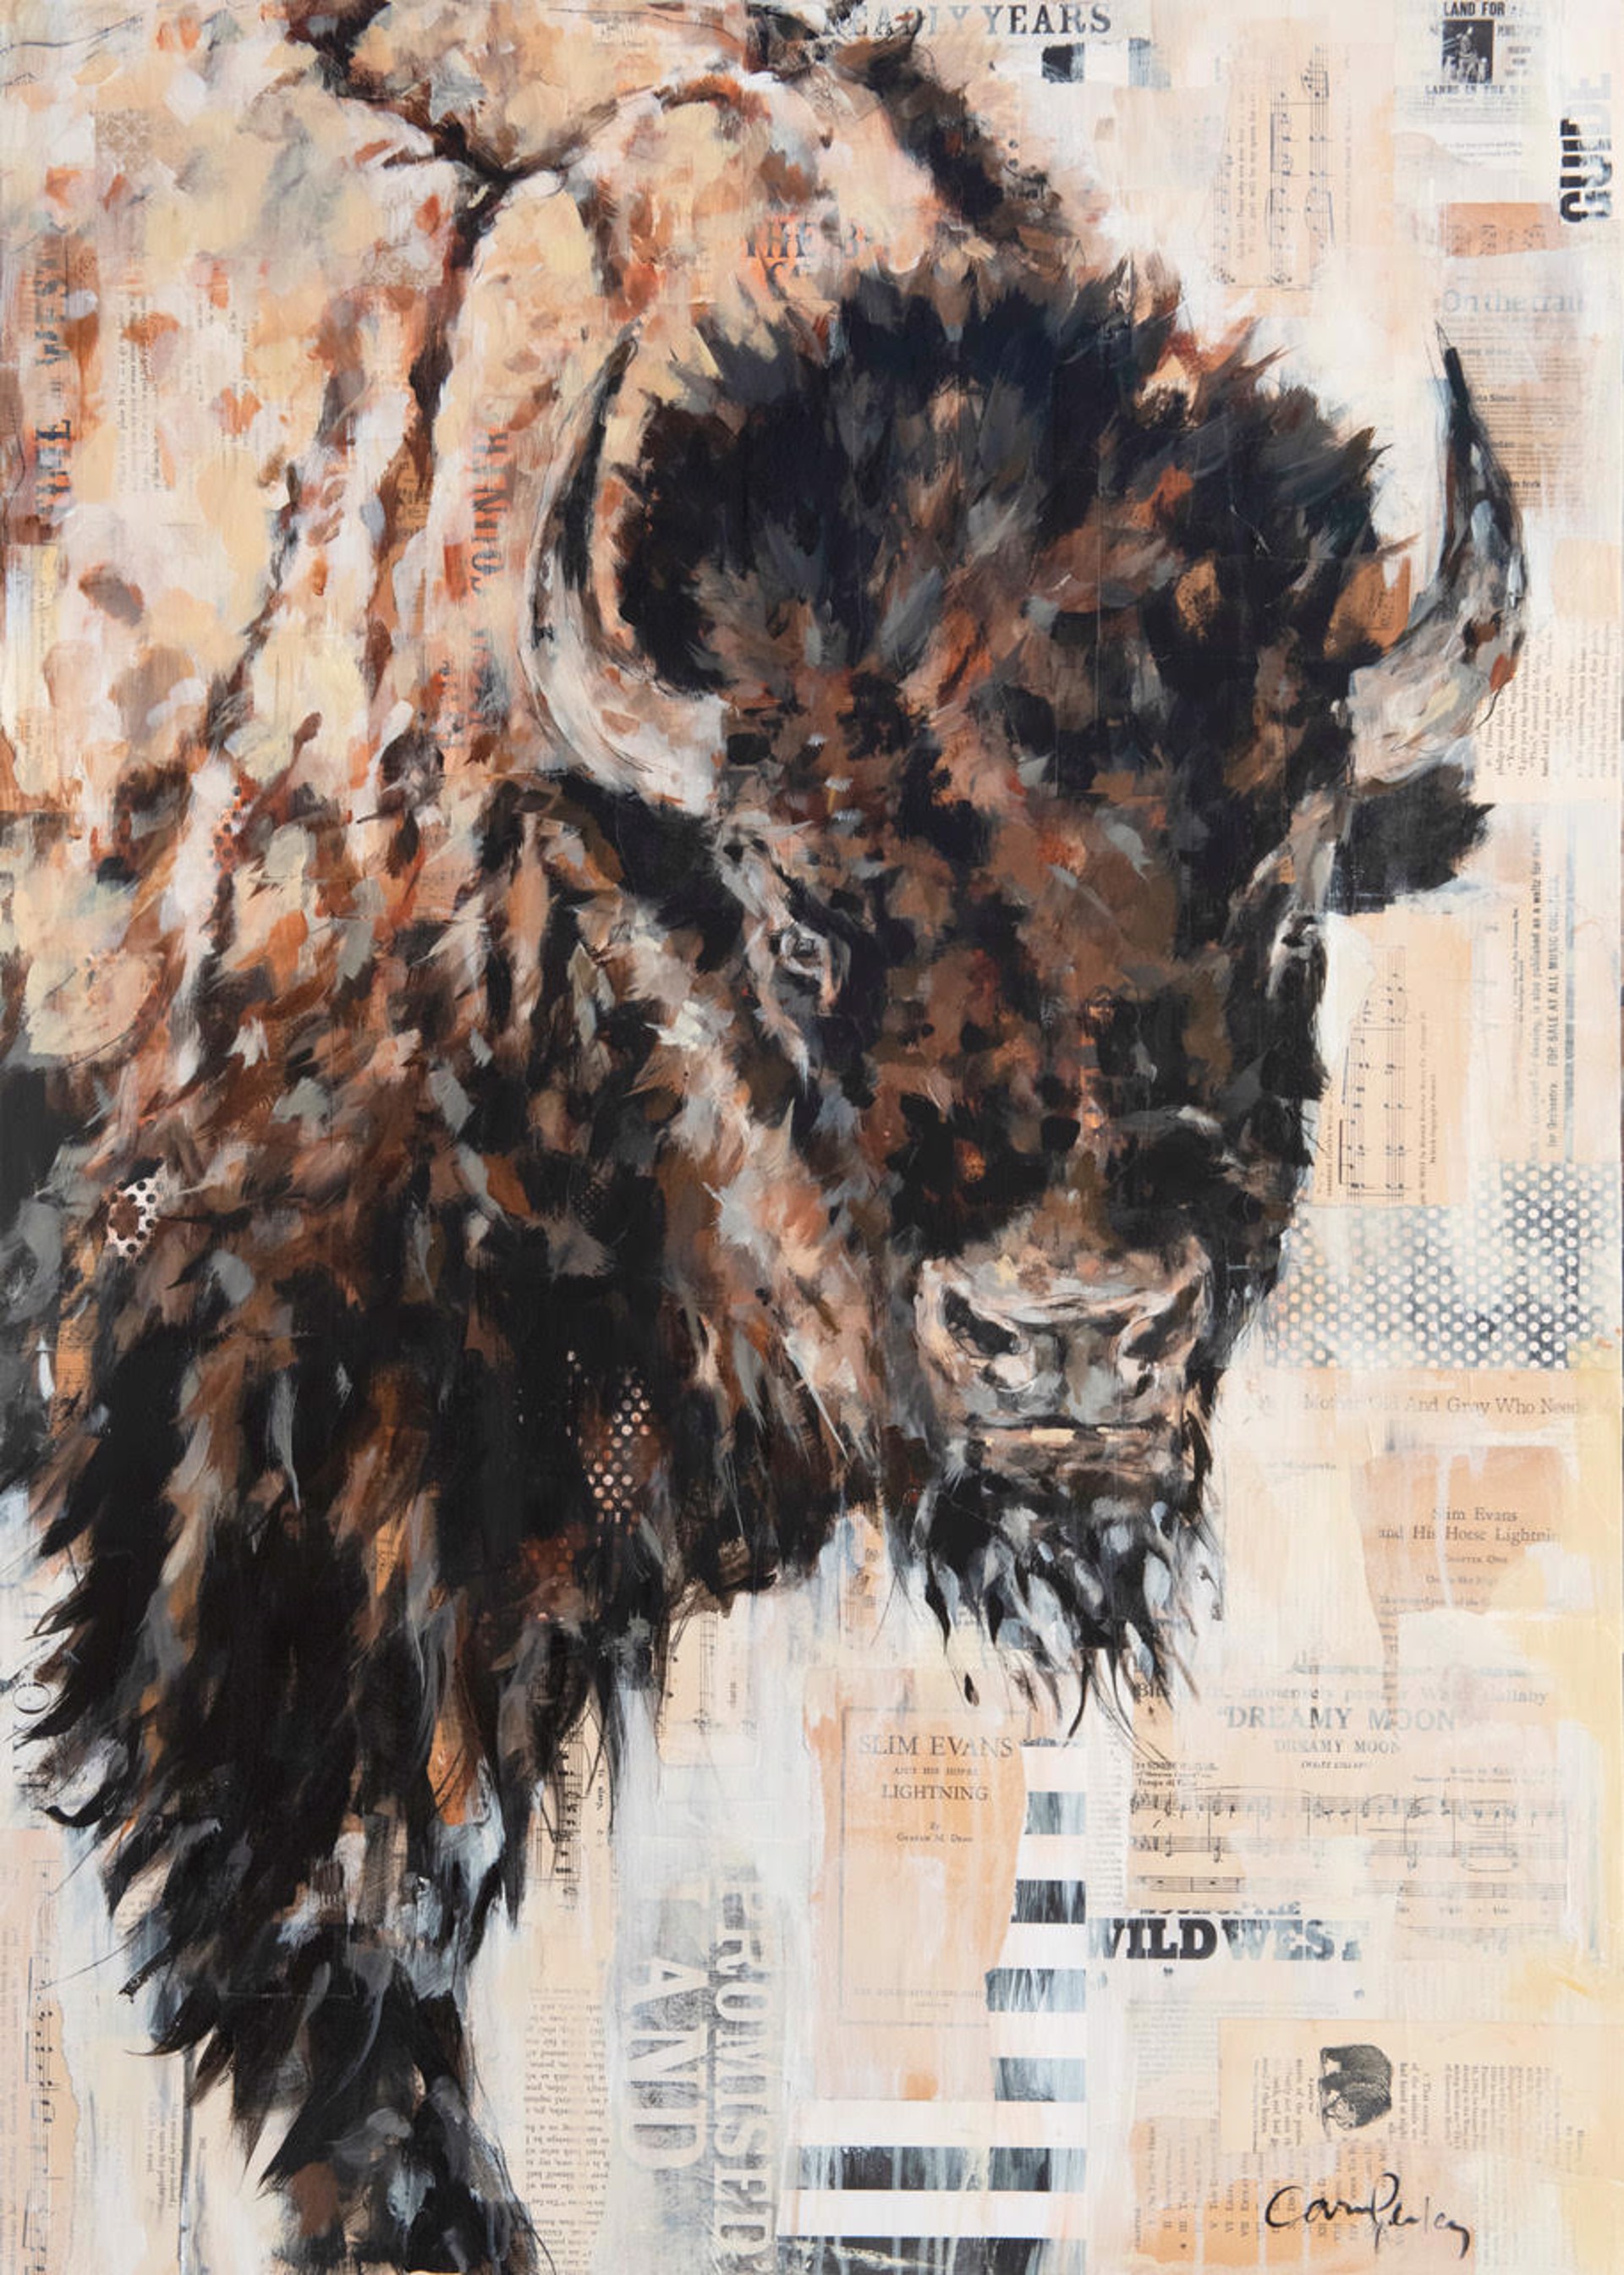 A Contemporary Painting Of A Bison On Collage By Carrie Penley Available At Gallery Wild